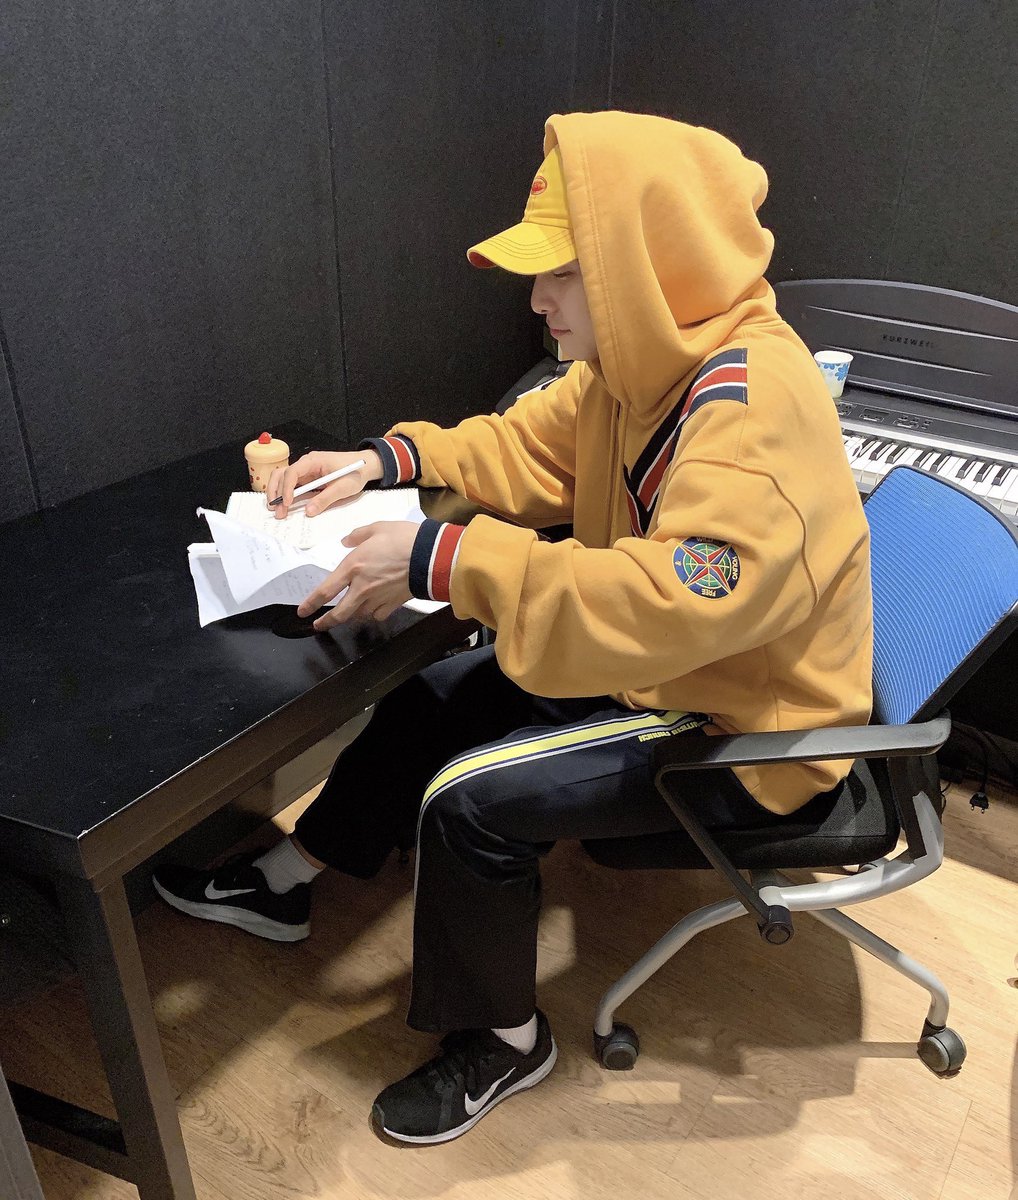 1. The legendary yellow sweaterseoho was seen wearing the yellow sweater multiple times during his trainee days. the last time we saw him wearing it was during Twilight era.